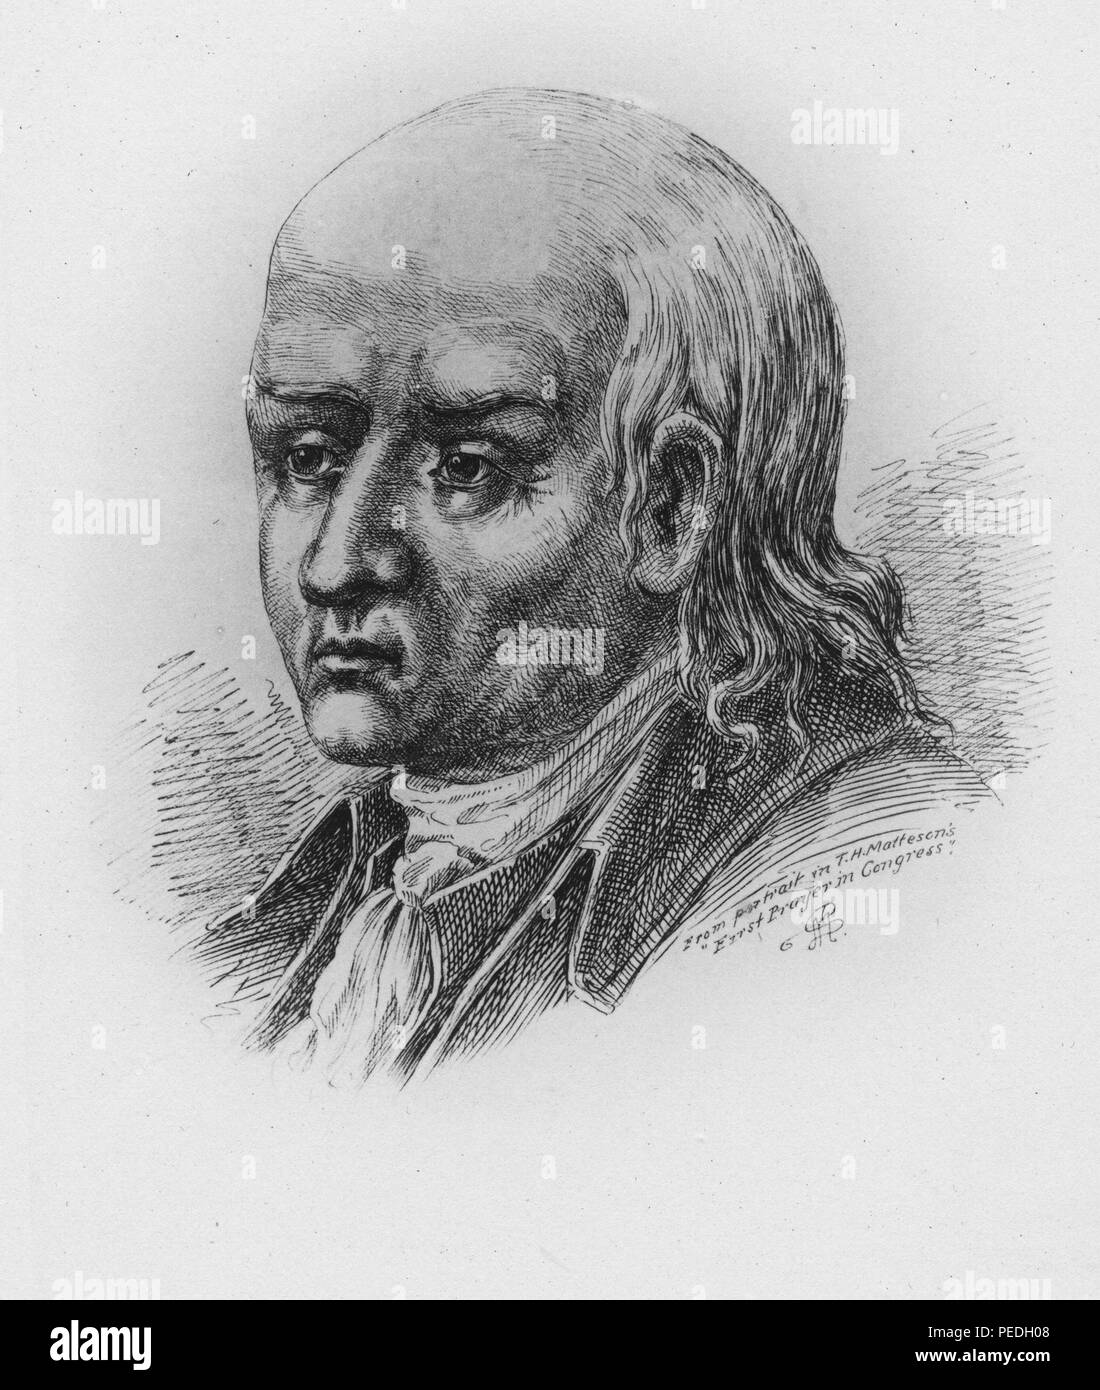 Engraved portrait of Isaac Low, delegate to the Continental Congress who opposed armed conflict with Great Britain and was accused to treason, eventually leaving the United States, New York, 1836. From the New York Public Library. () Stock Photo